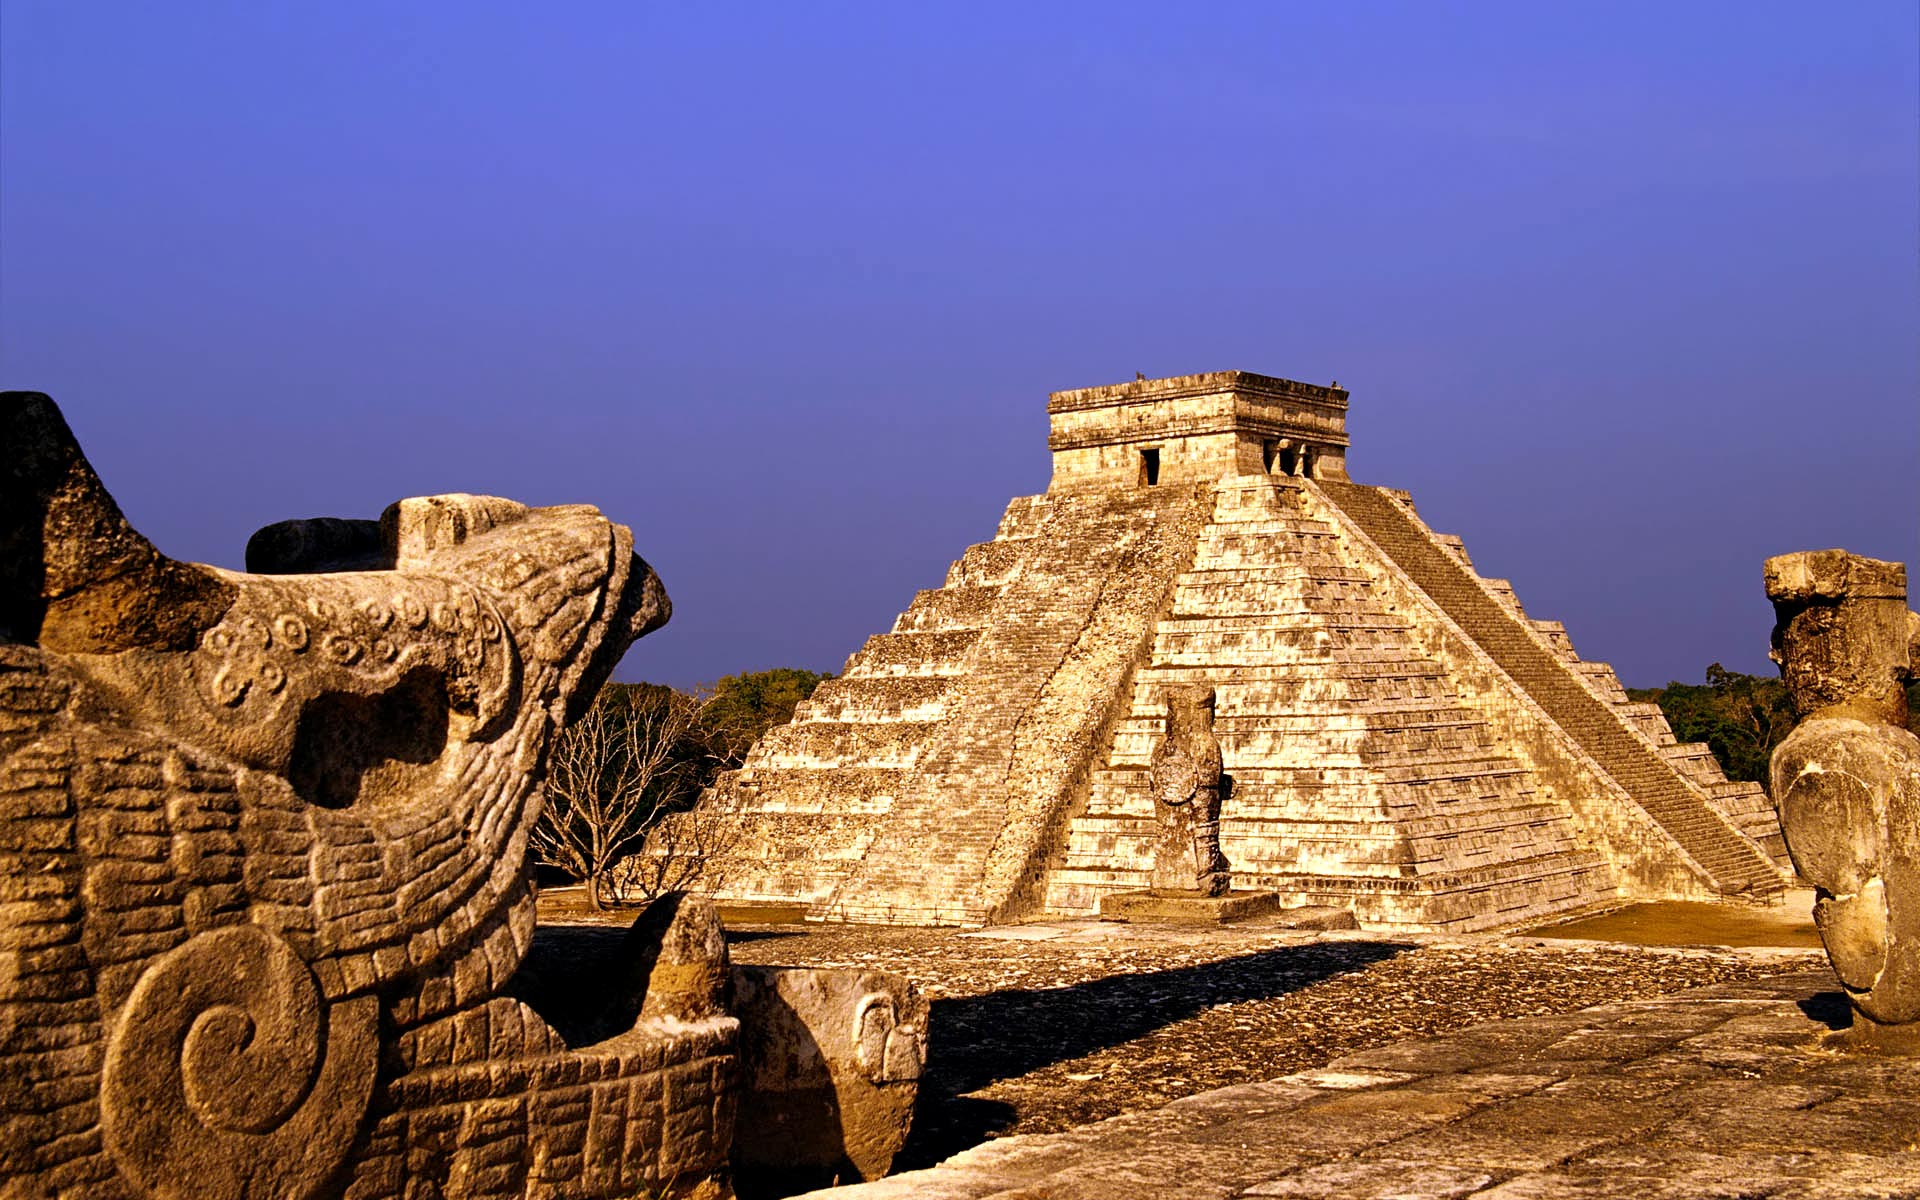 Mexico Pyramids Background HD Wallpaper And Make This For